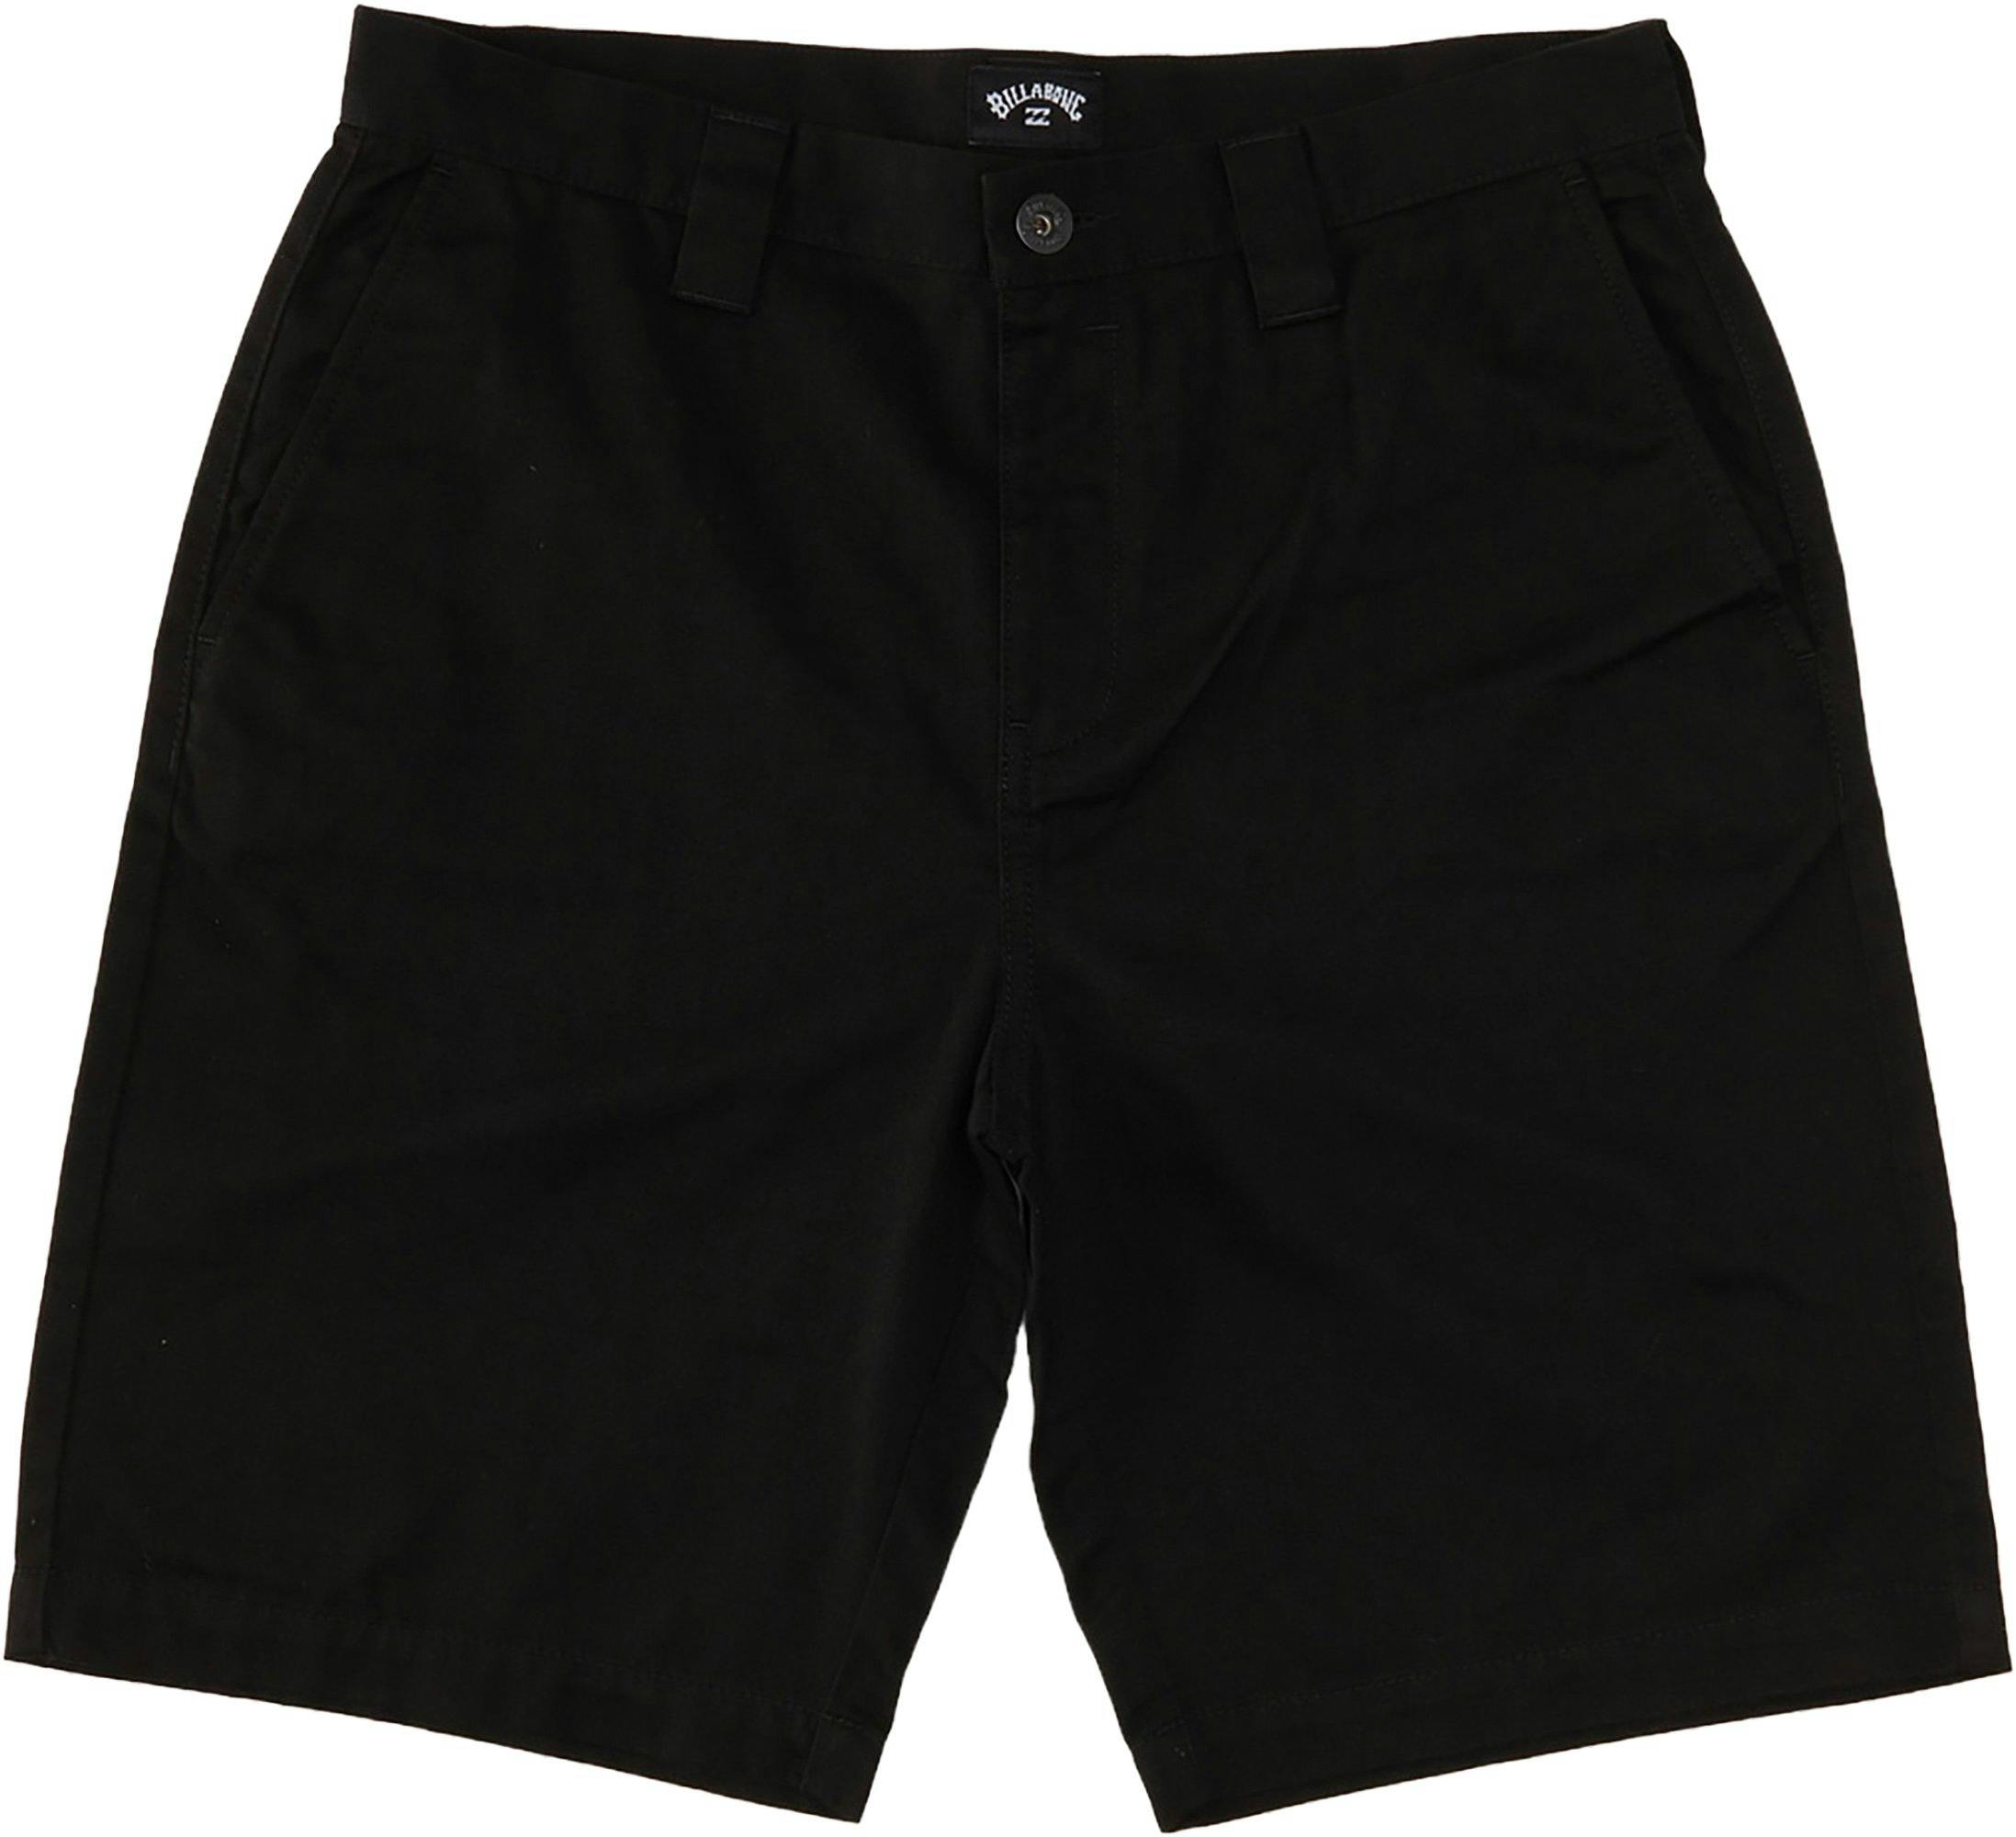 Product image for Carter Workwear Short - Boy's